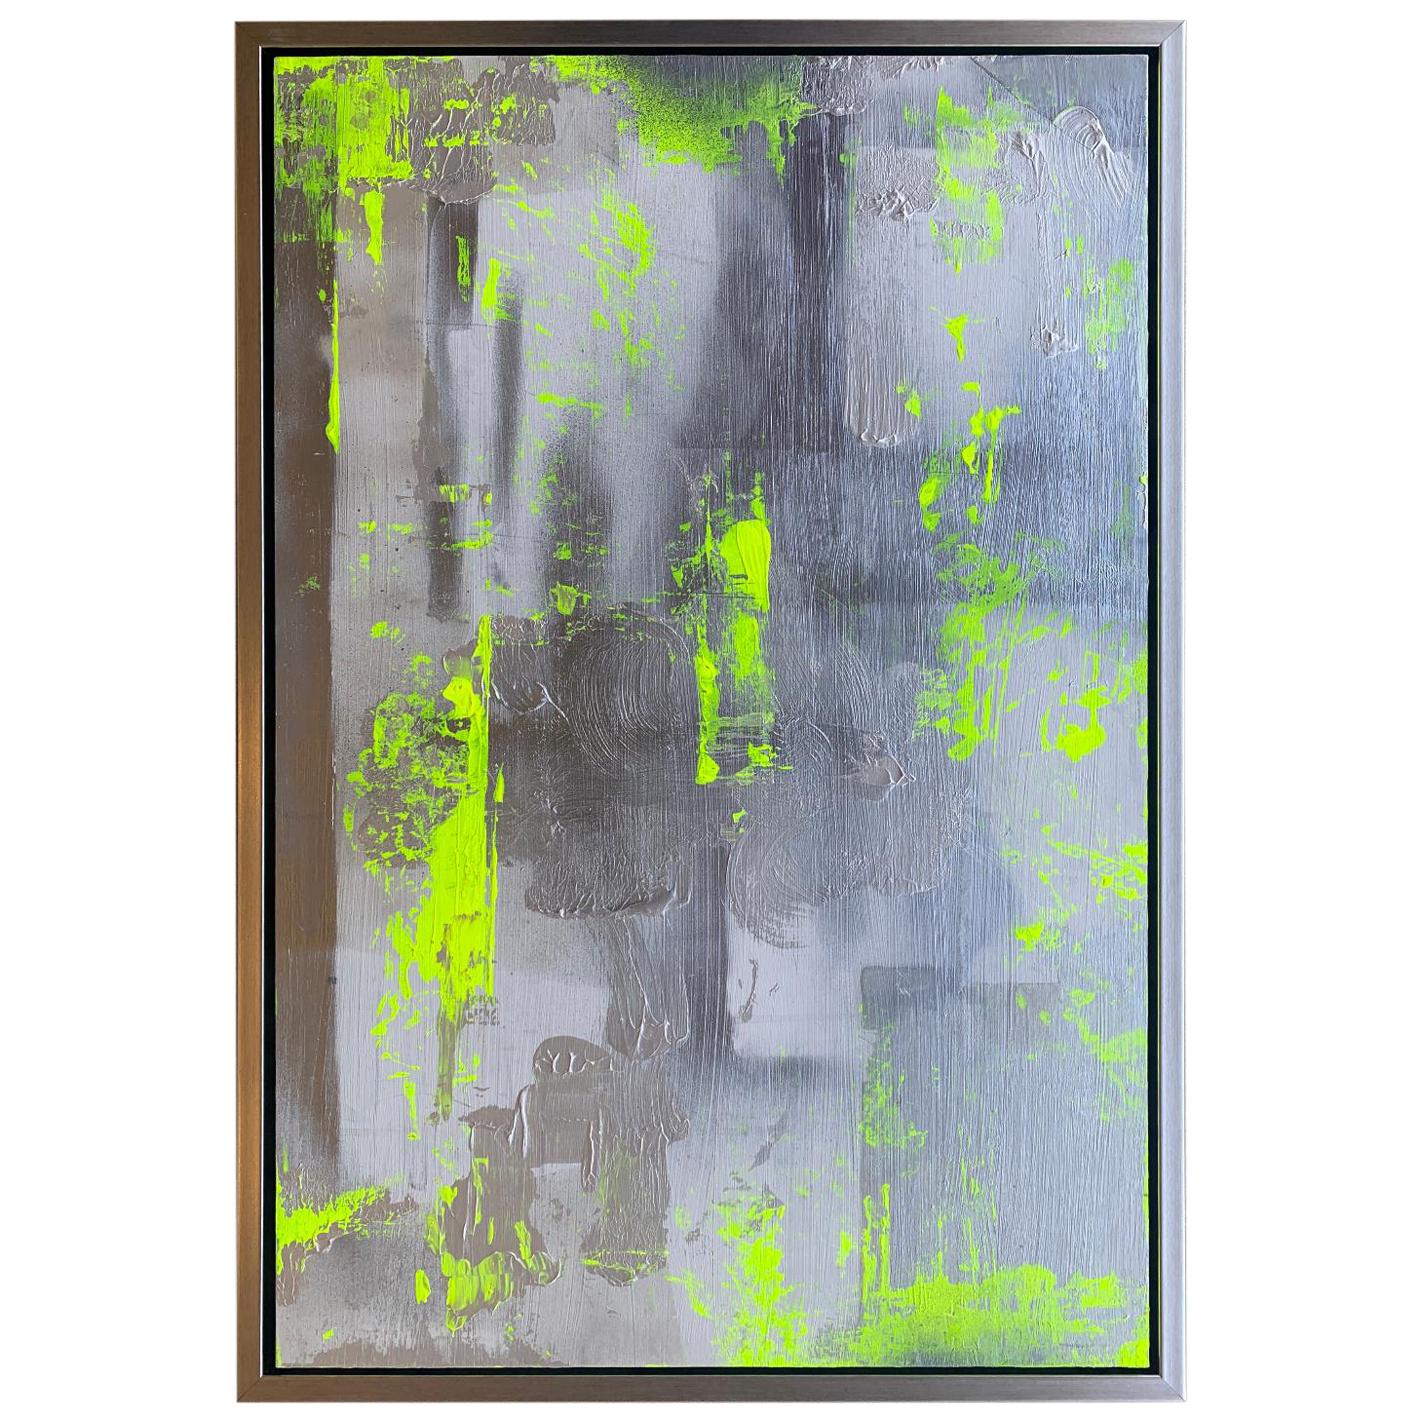 Original “Chartreuse Verseau” Modern Abstract Painting by Artist Chanel Verdult